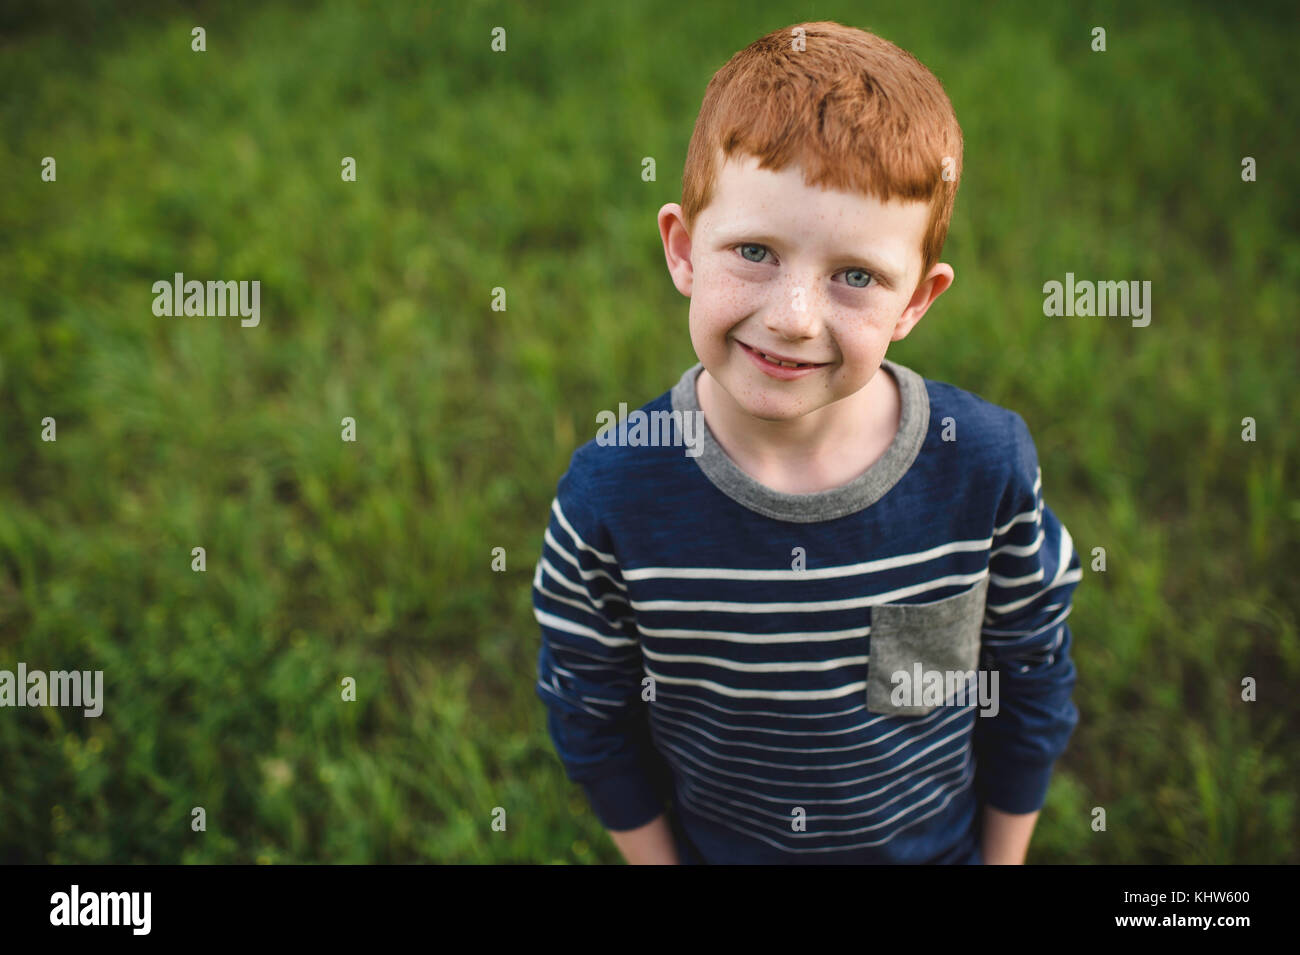 Portrait of red haired boy standing on grass Banque D'Images